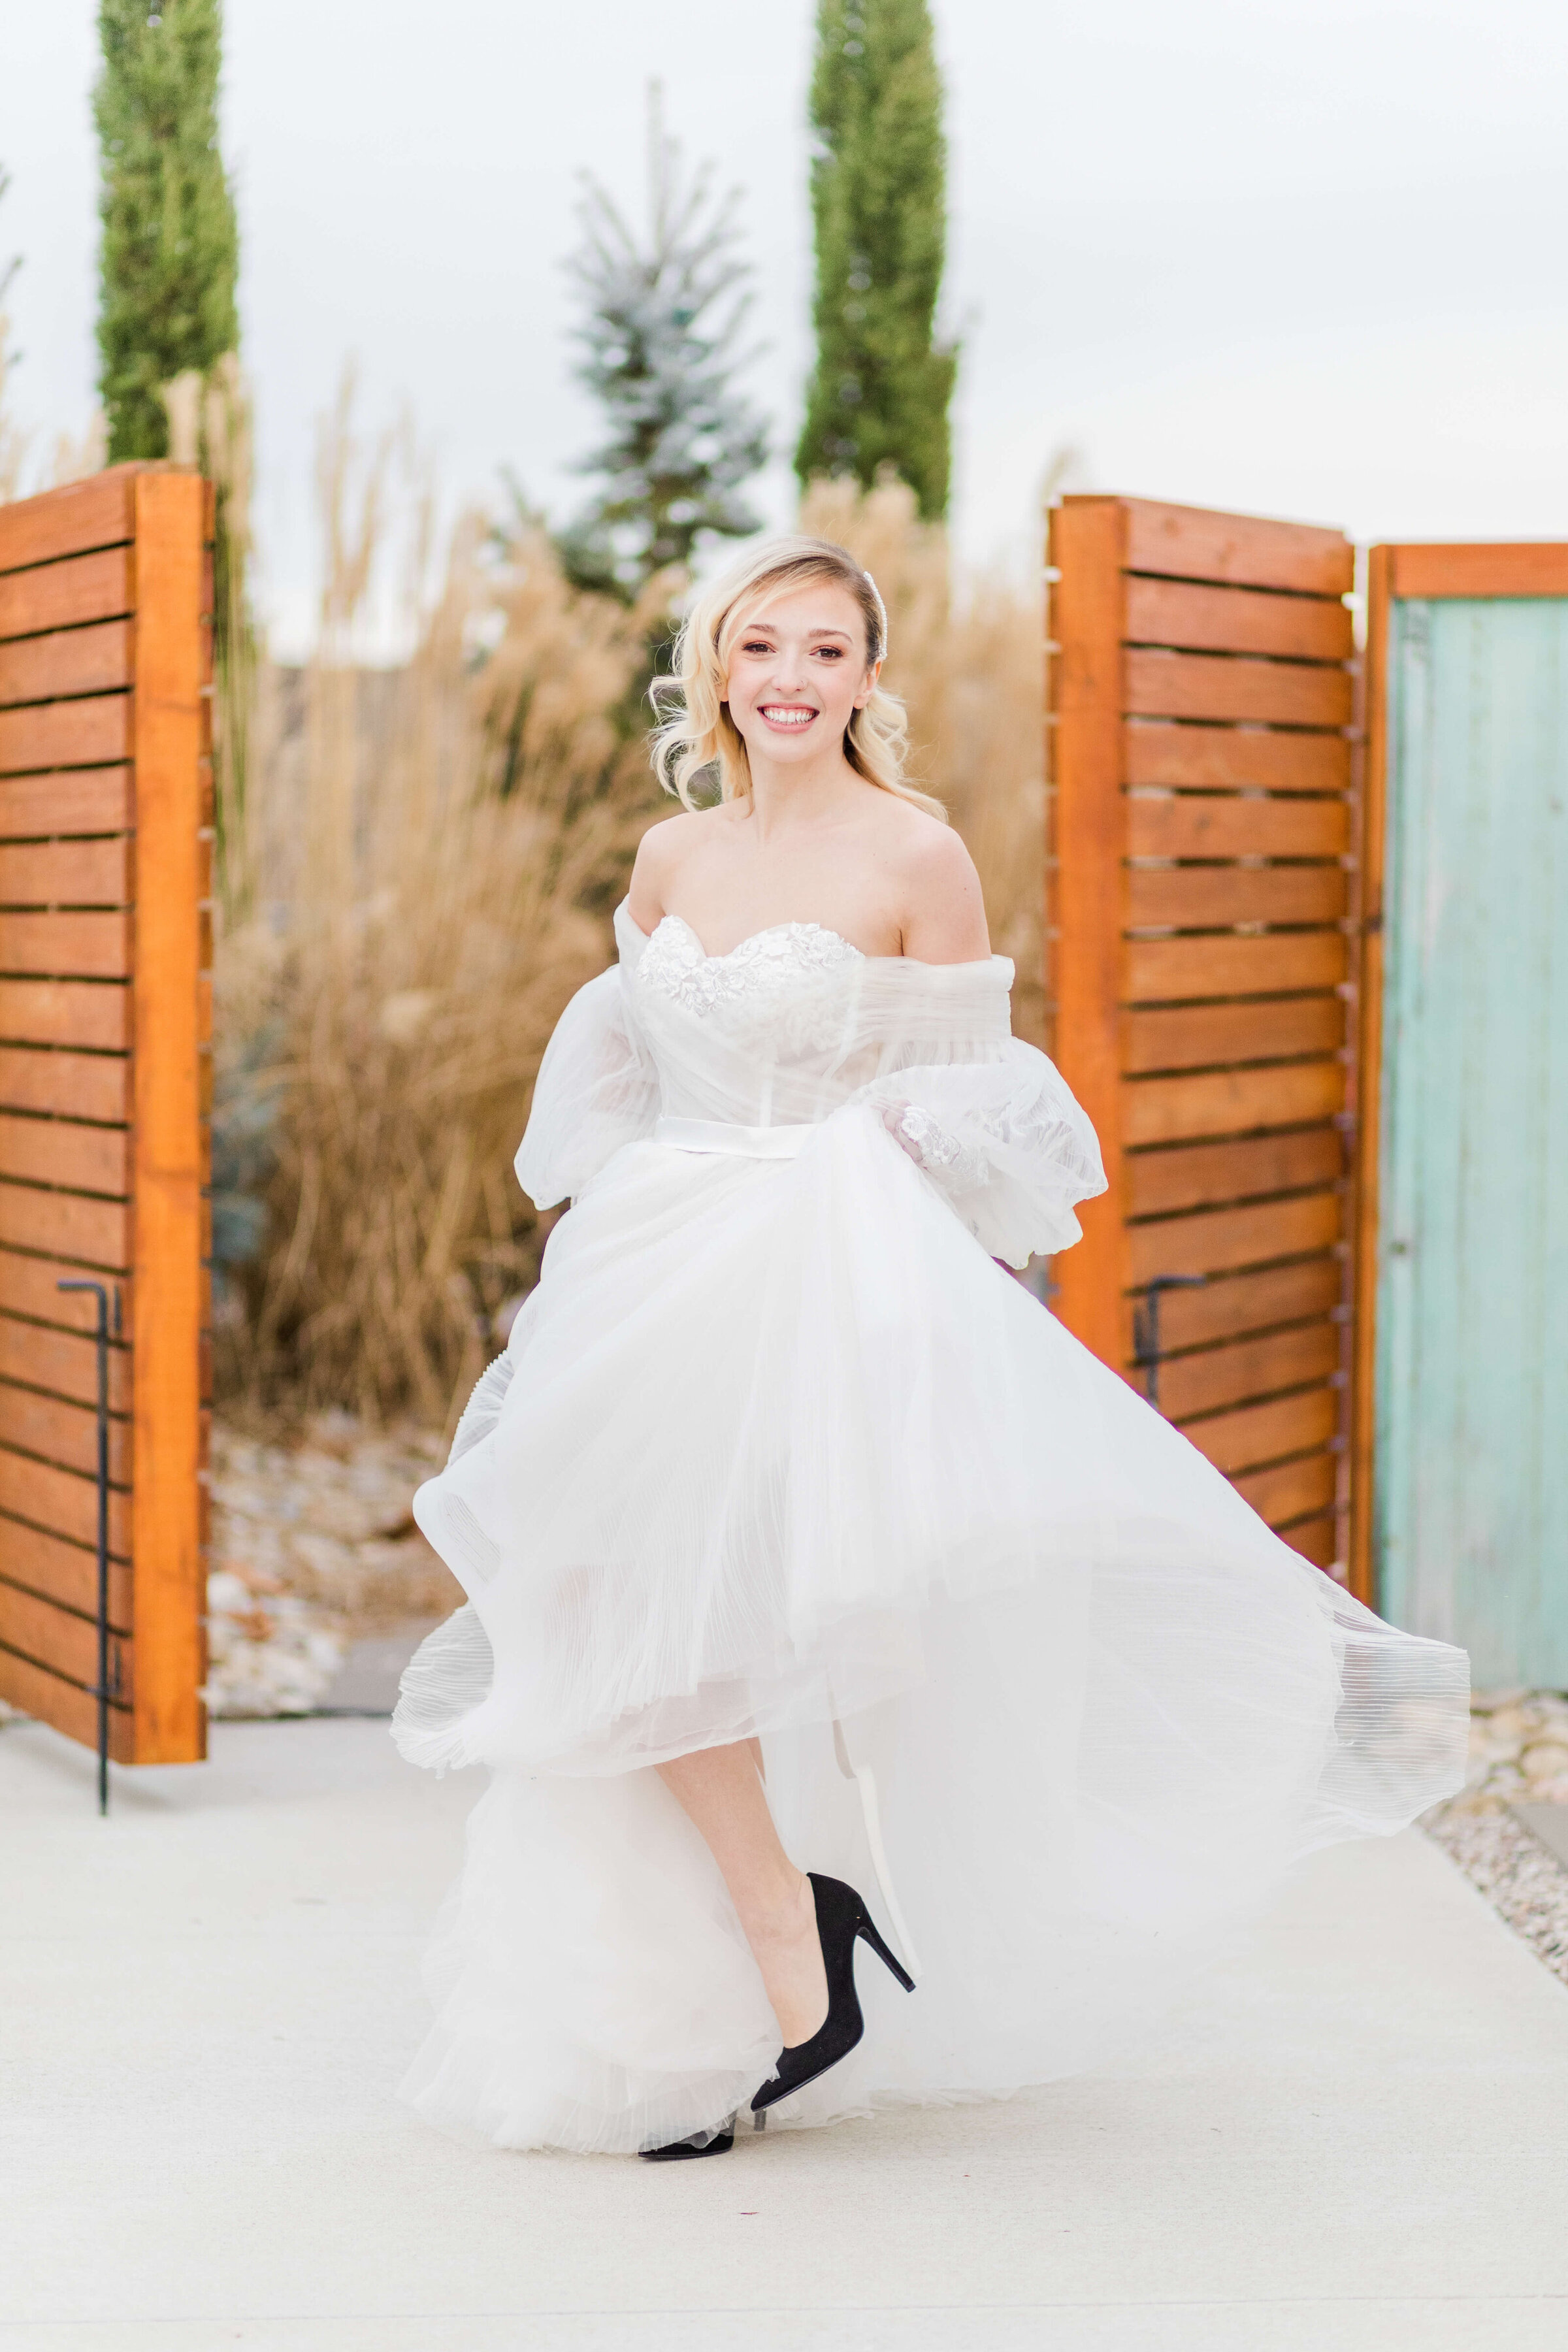 A bride in a white dress and black heels twirls around with excitement.